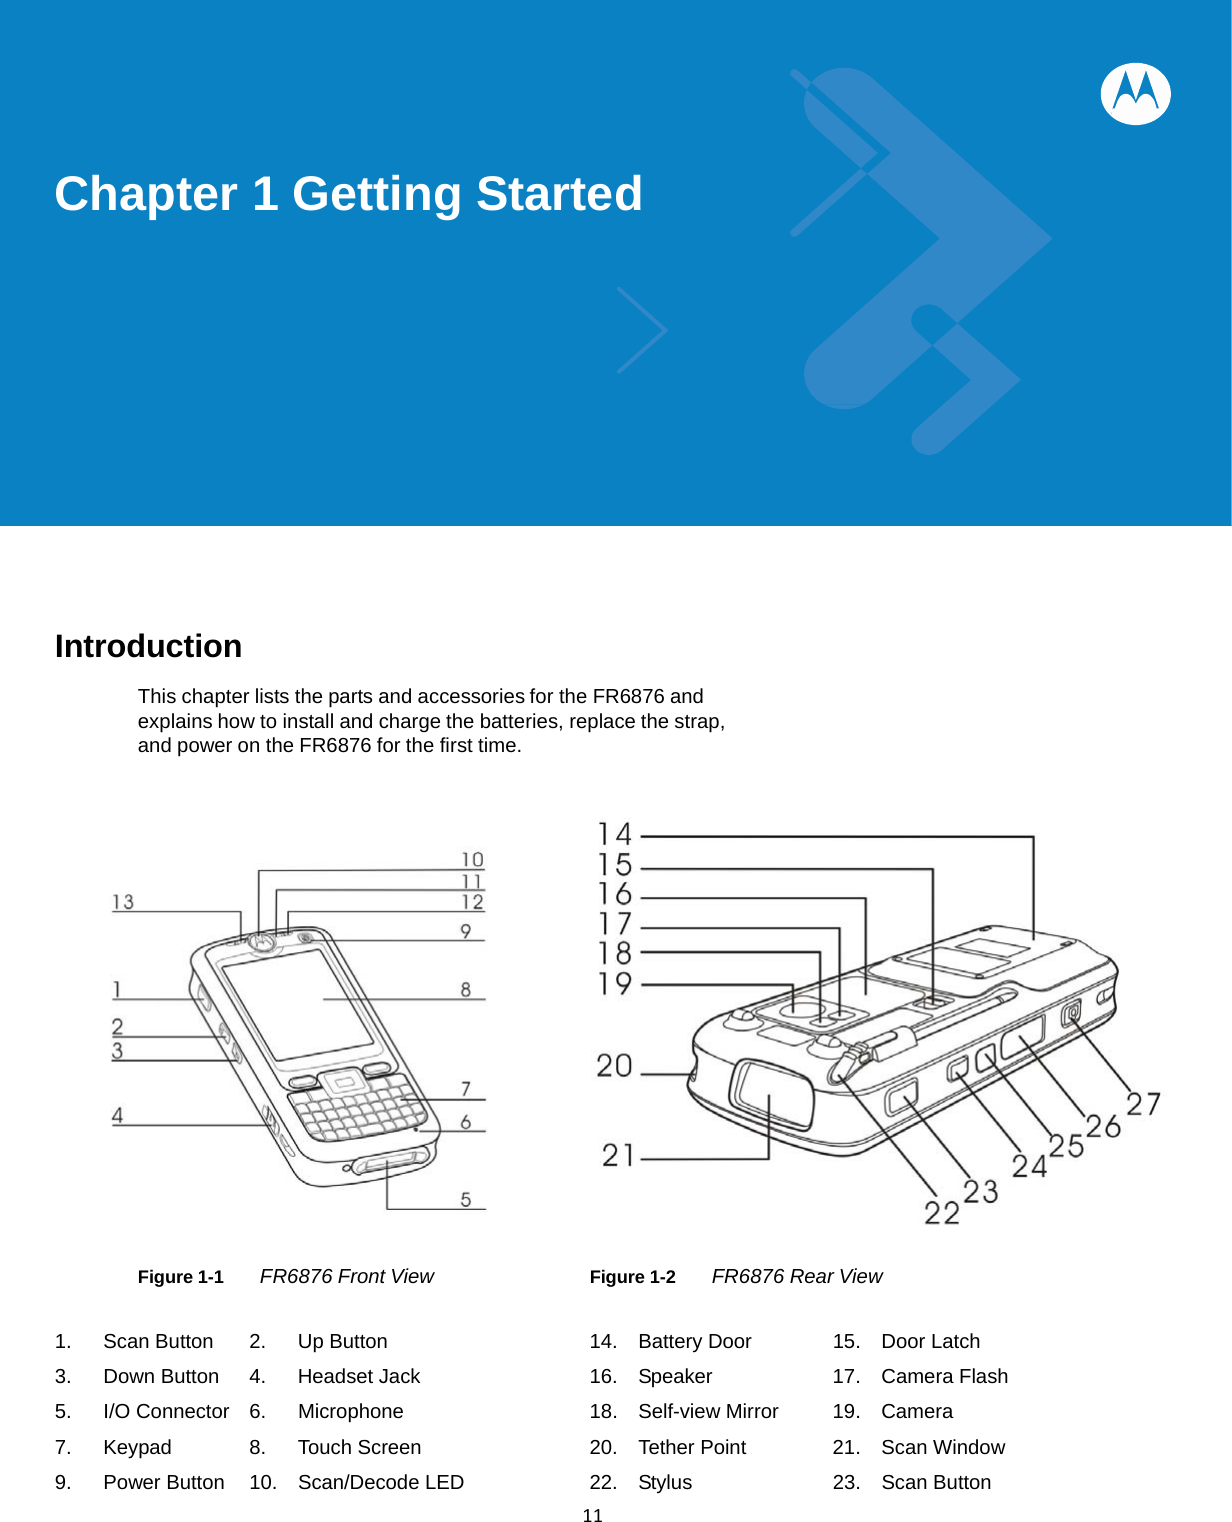  11Chapter 1 Getting Started            Introduction  This chapter lists the parts and accessories for the FR6876 and explains how to install and charge the batteries, replace the strap, and power on the FR6876 for the first time.                                    Figure 1-1      FR6876 Front View    Figure 1-2    FR6876 Rear View   1.  Scan Button    2.  Up Button               14.  Battery Door     15.  Door Latch 3. Down Button   4. Headset Jack    16. Speaker    17. Camera Flash  5. I/O Connector  6. Microphone    18. Self-view Mirror  19. Camera 7.  Keypad        8.  Touch Screen        20.  Tether Point     21.  Scan Window   9. Power Button   10. Scan/Decode LED   22. Stylus    23. Scan Button 